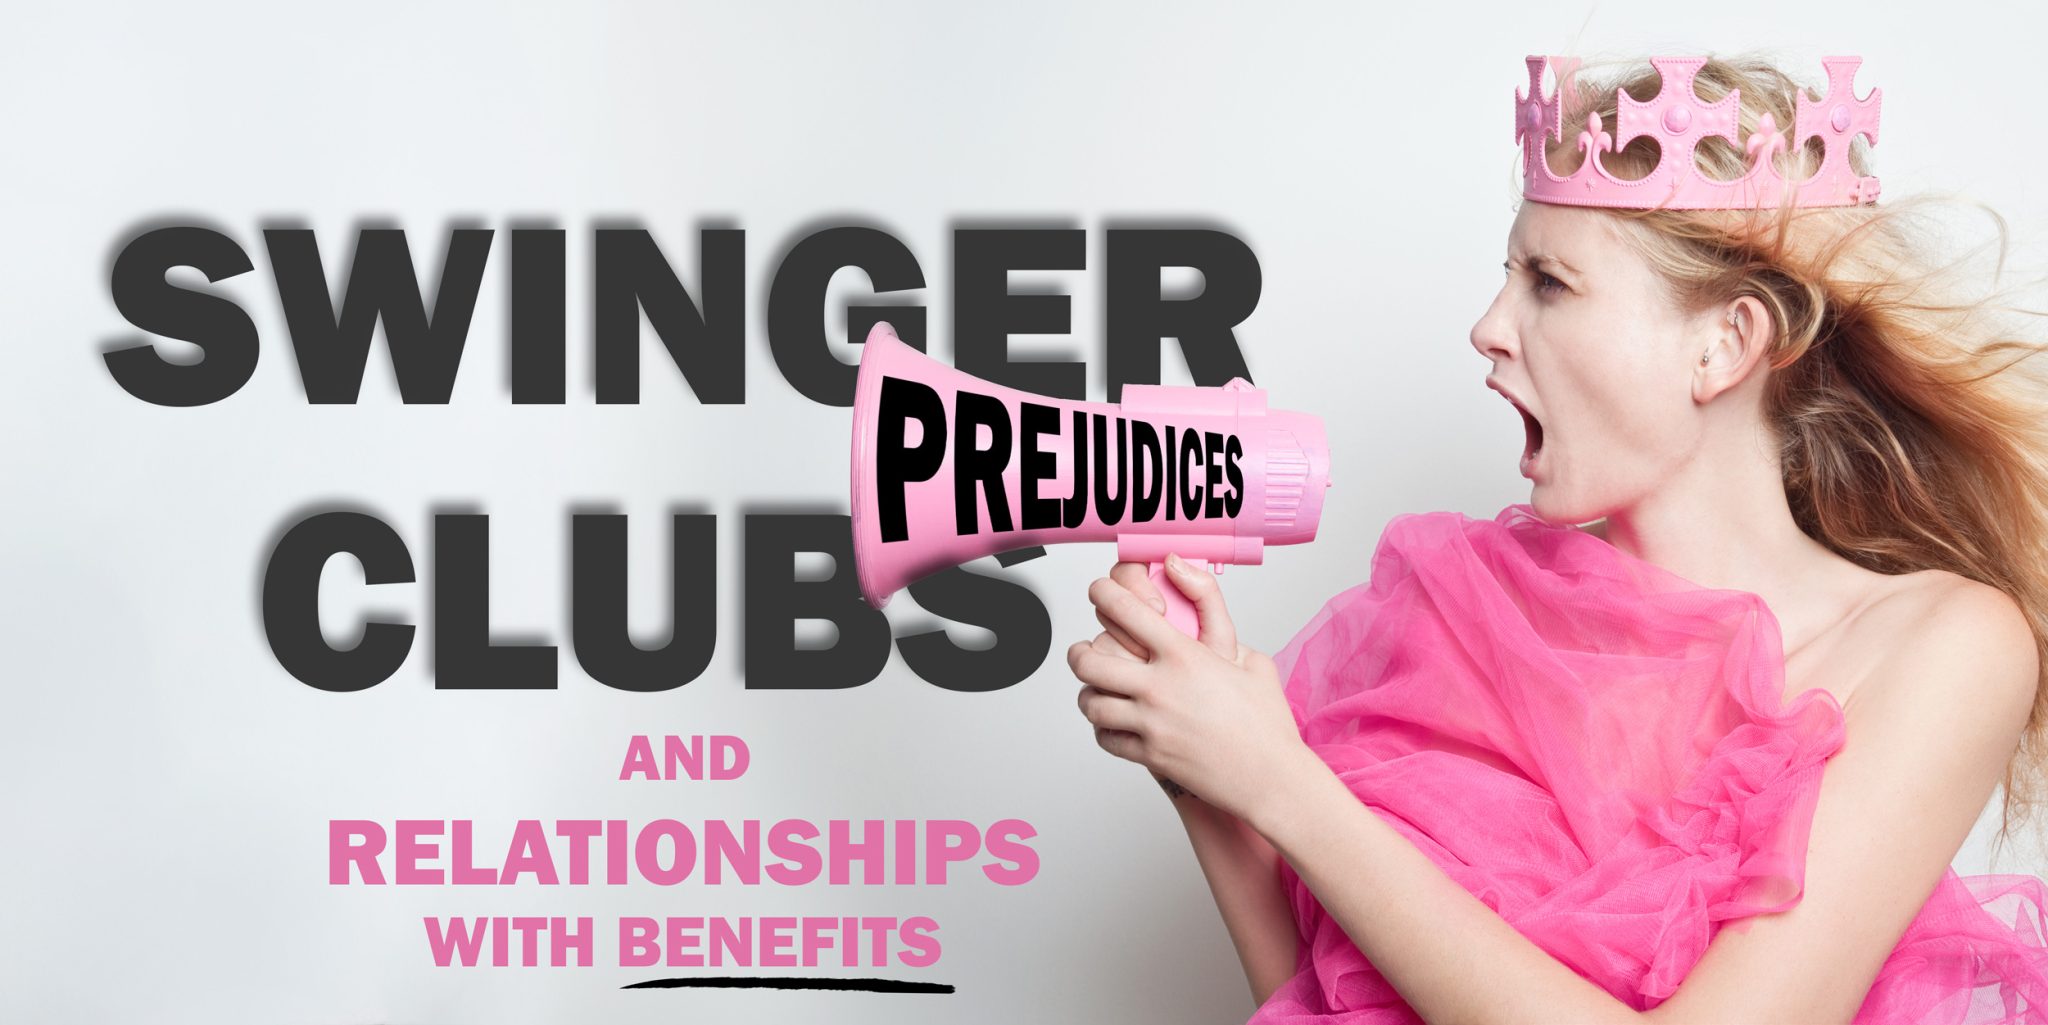 Prejudices about swinger clubs and relationships with benefits - billede